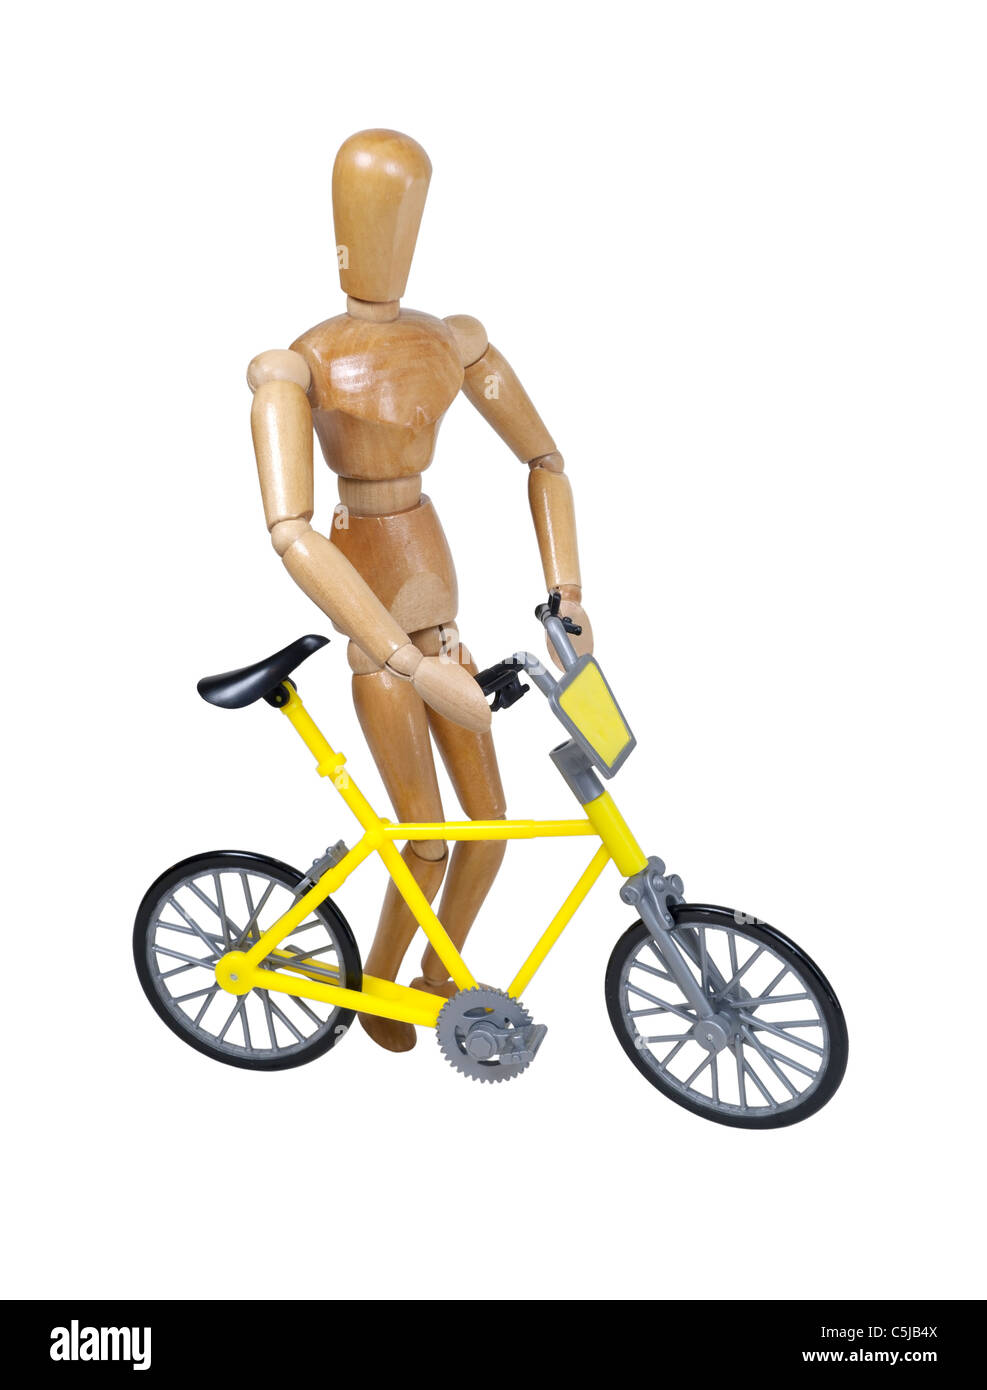 Walking a yellow bicycle used as a personal transportation device - path included Stock Photo